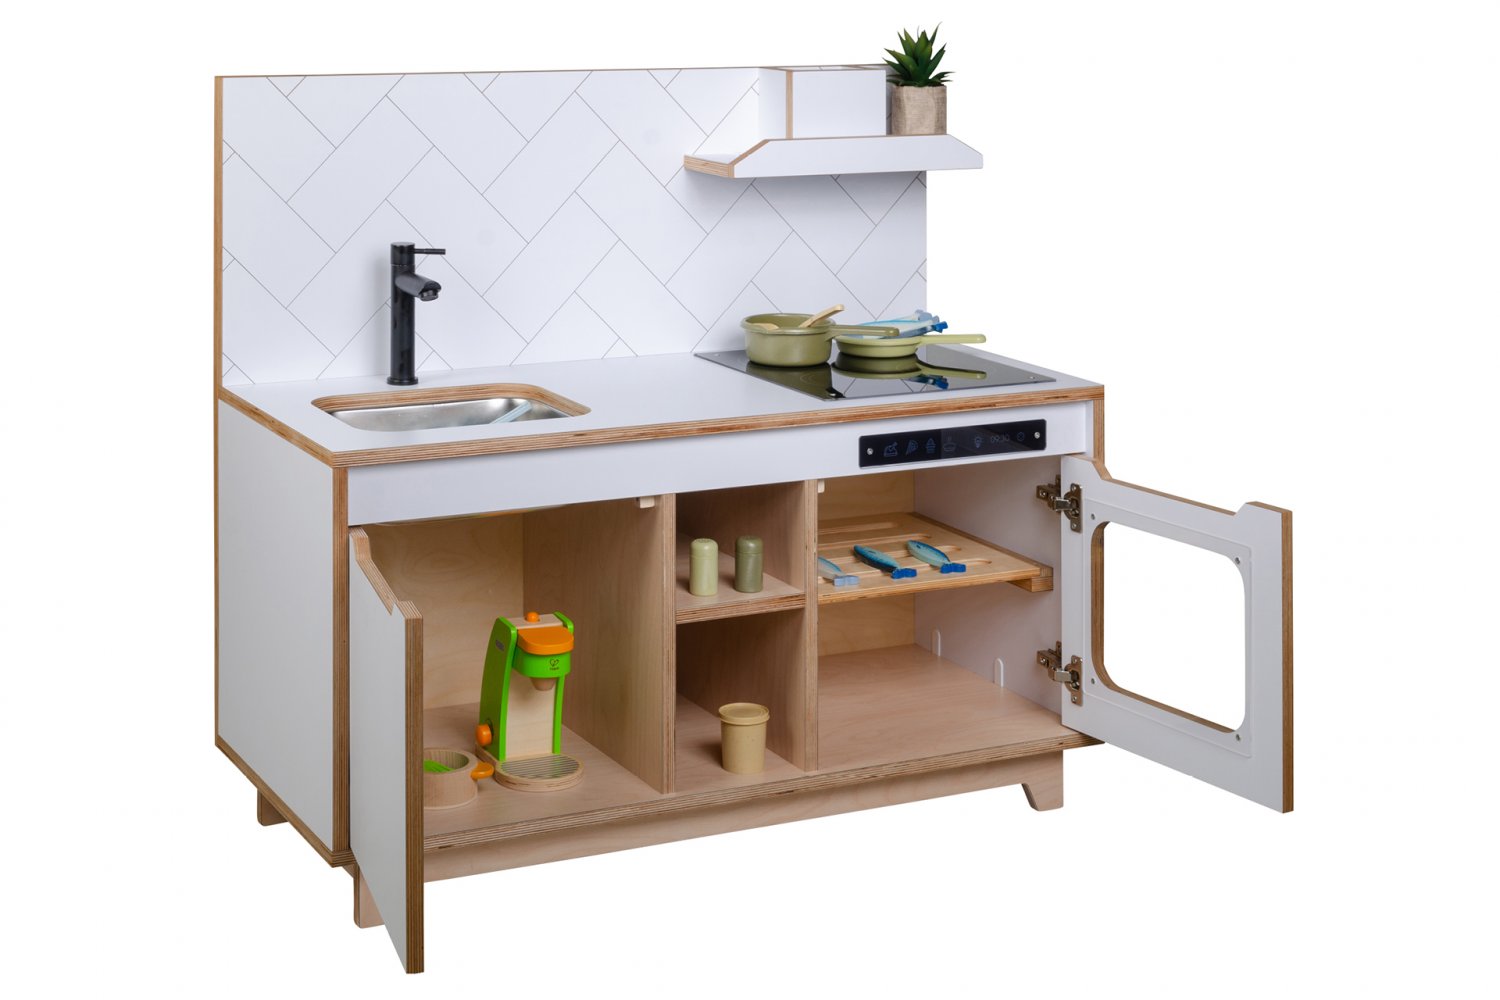 Wooden Plywood Kitchen for Pre-schools